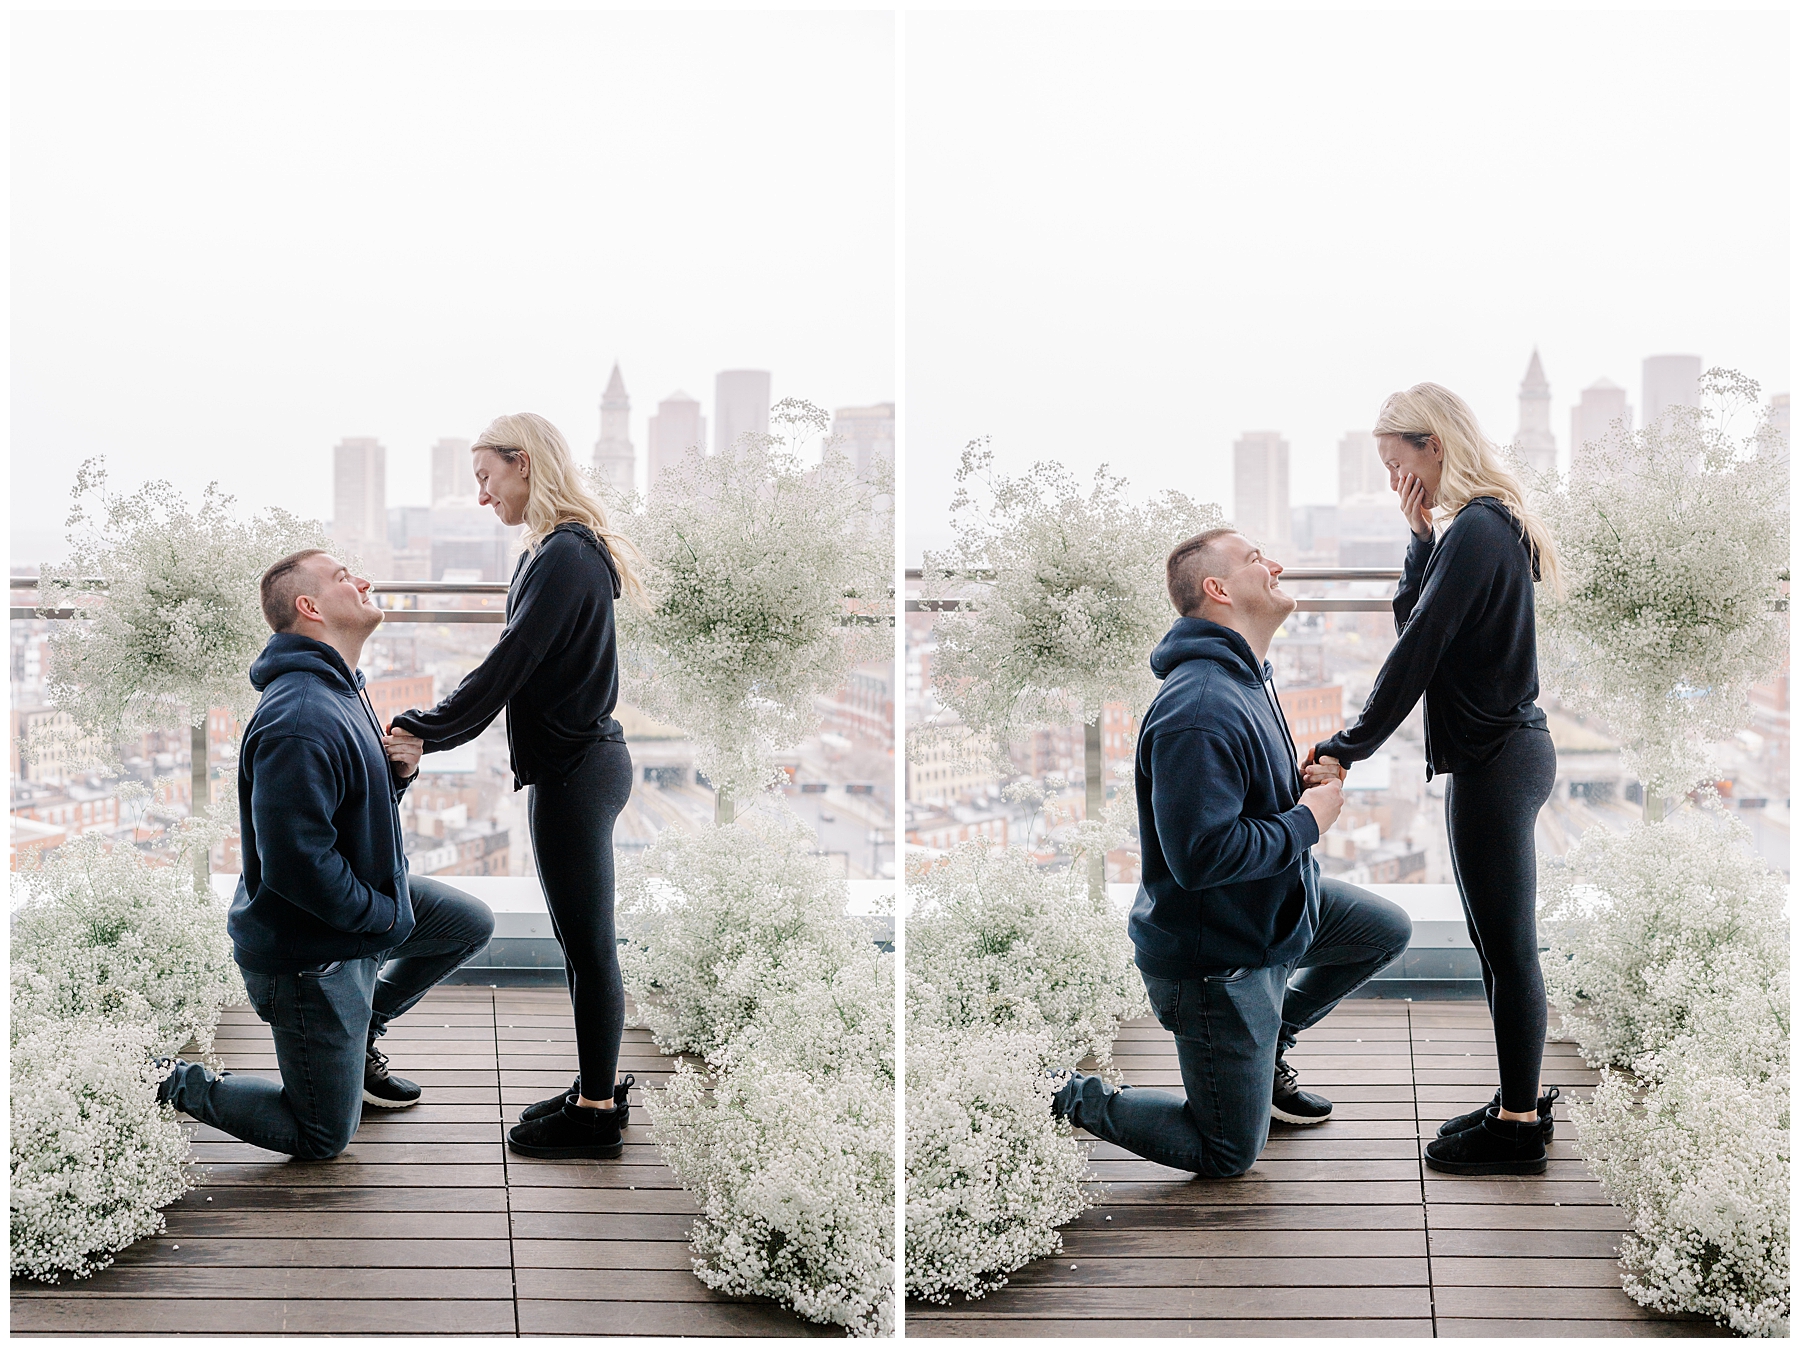 man proposes to girlfriend surrounded by white flowers on balcony with boston skyline in background